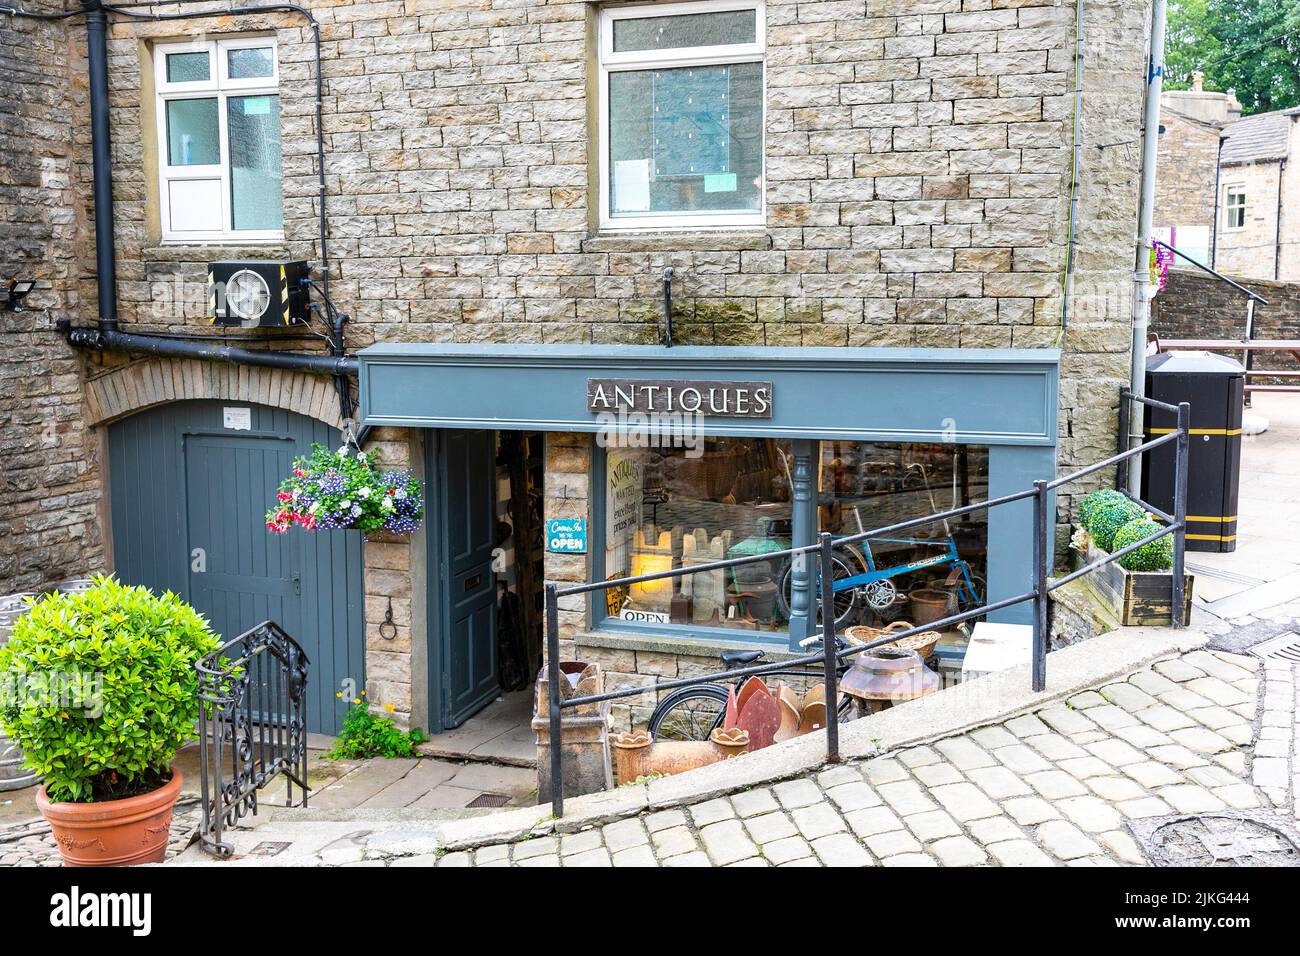 Hawes market town in Yorkshire Dales, Antiques store in the town centre, Raleigh chopper bike in shop window,Yorkshire,England,UK,Europe Stock Photo